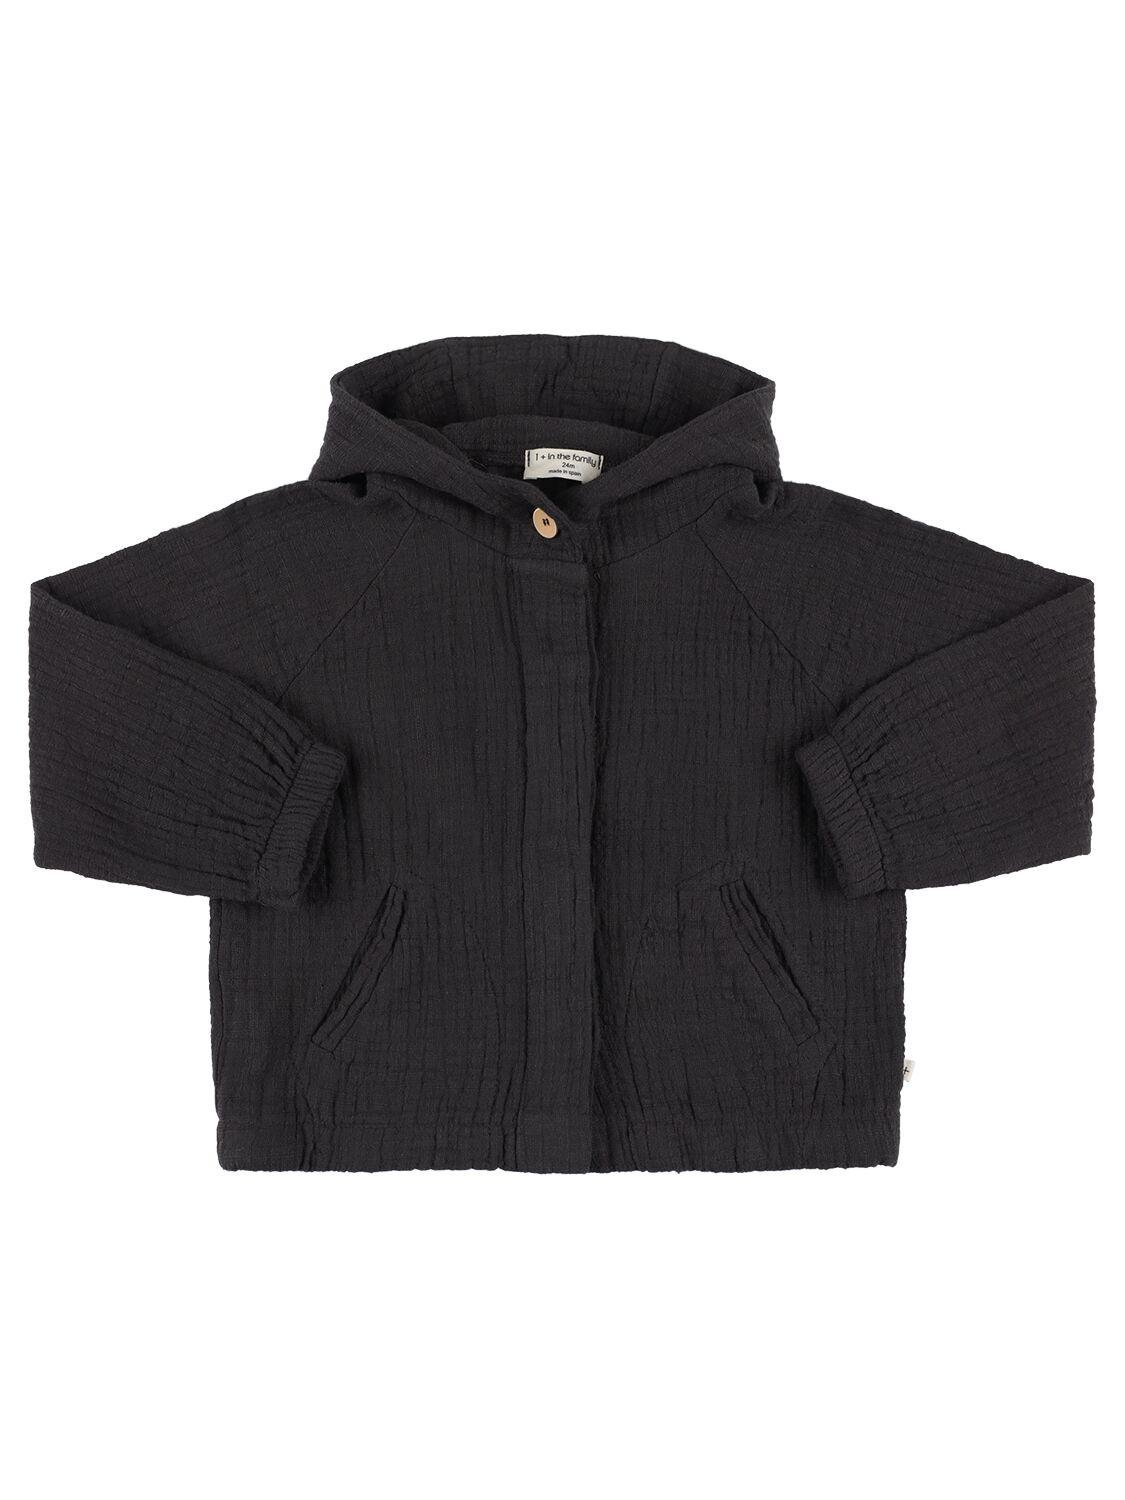 Hooded Cotton Jacket by 1 + IN THE FAMILY